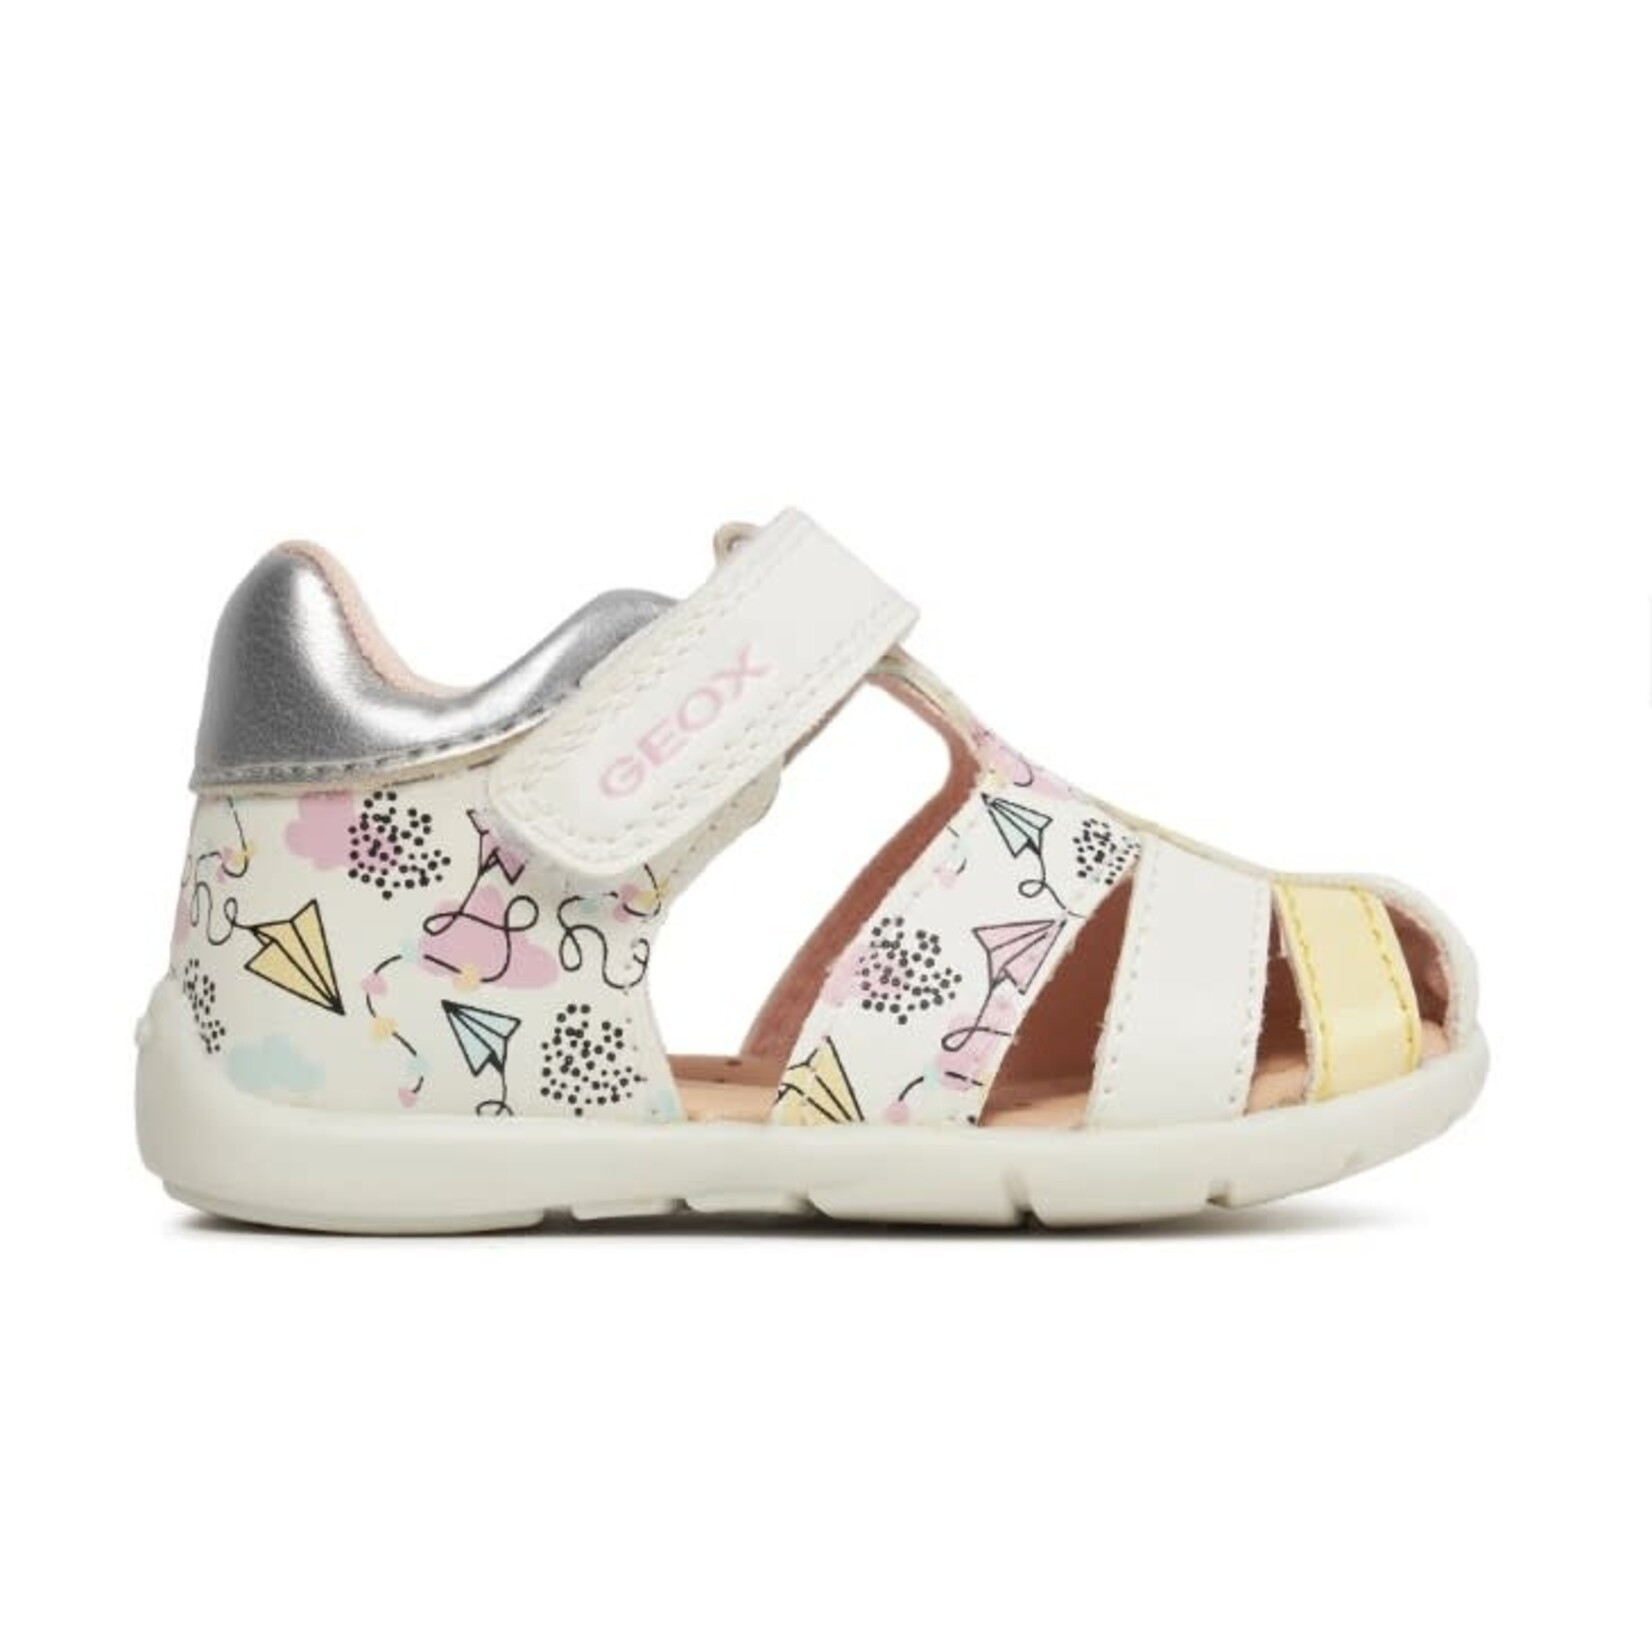 Geox GEOX - Closed-Toe First Steps Sandals 'Elthan - White/Multicolor'